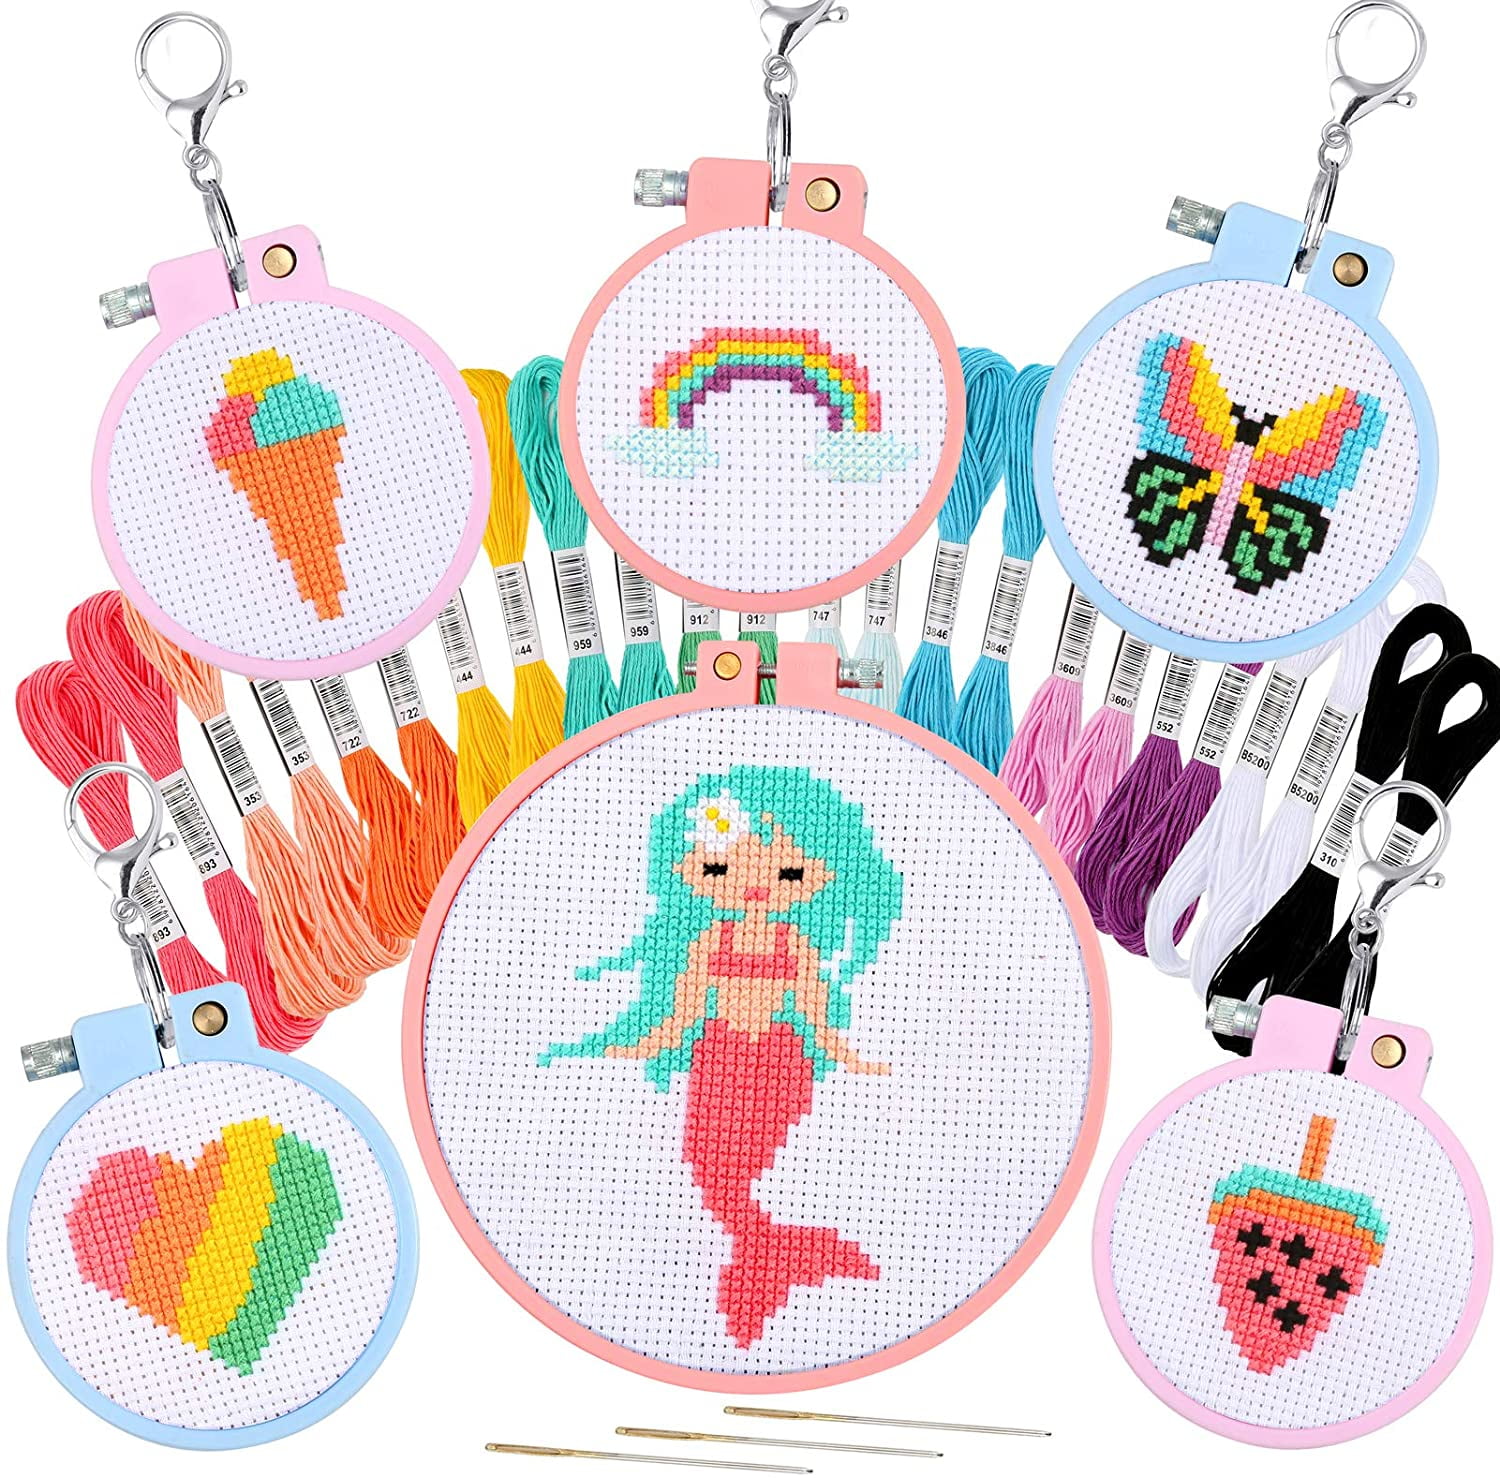 chwang 6 sets cross stitch kits for kids 7-13 embroidery beginner stamped  kits with instructions, keychains, hoops for girls